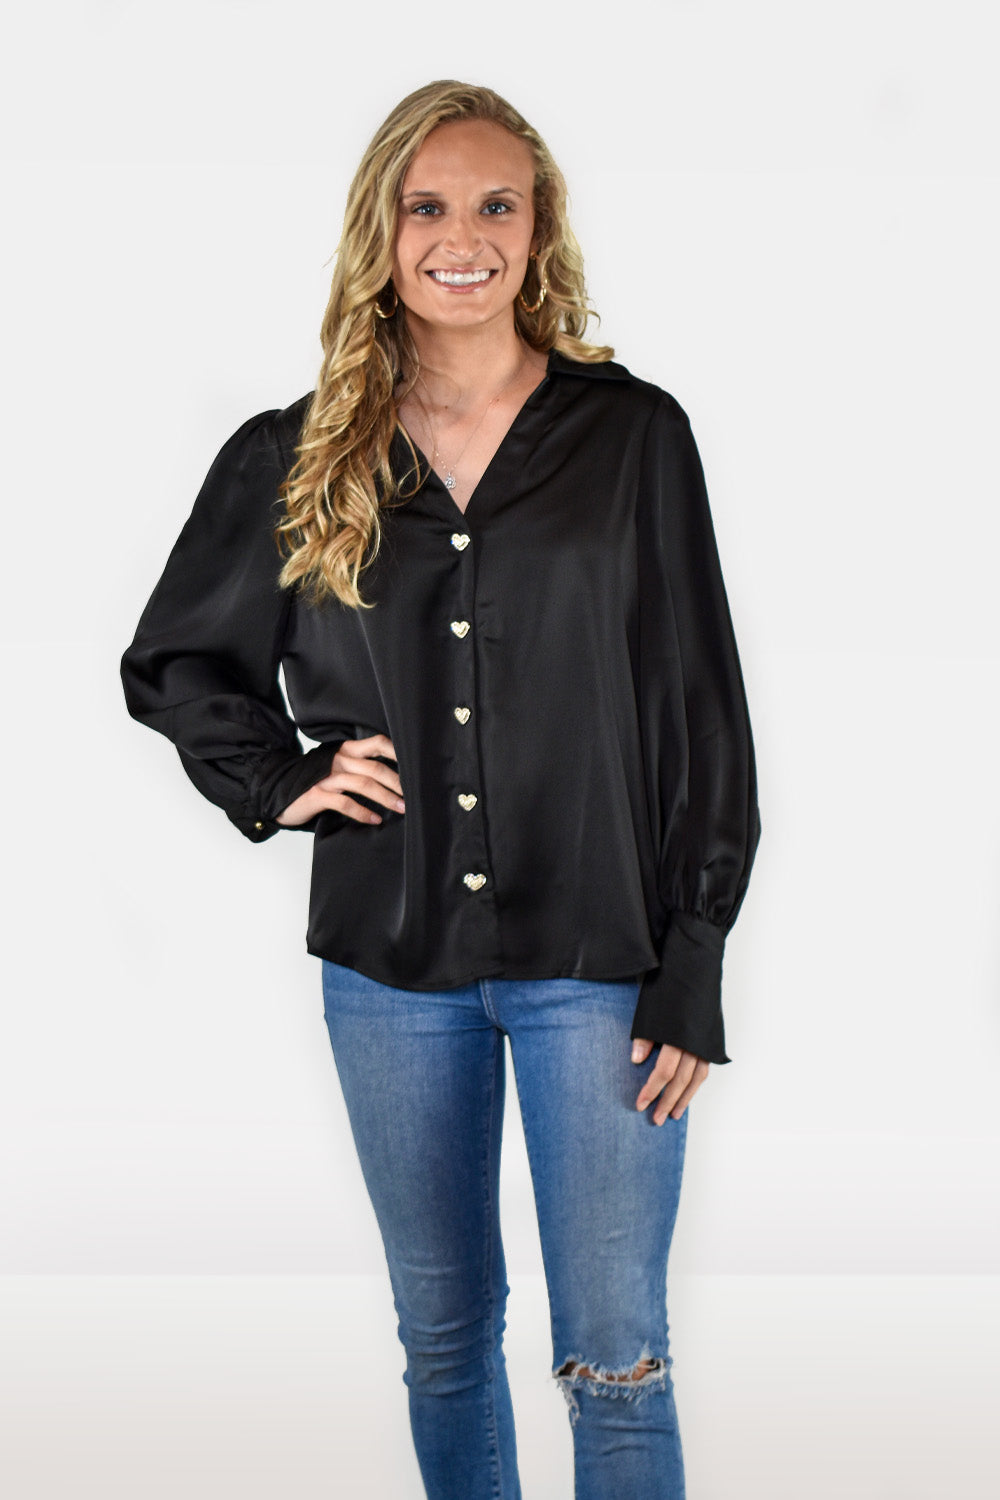 Satin Long Sleeve Blouse with Heart Shaped Buttons by Entro Clothing